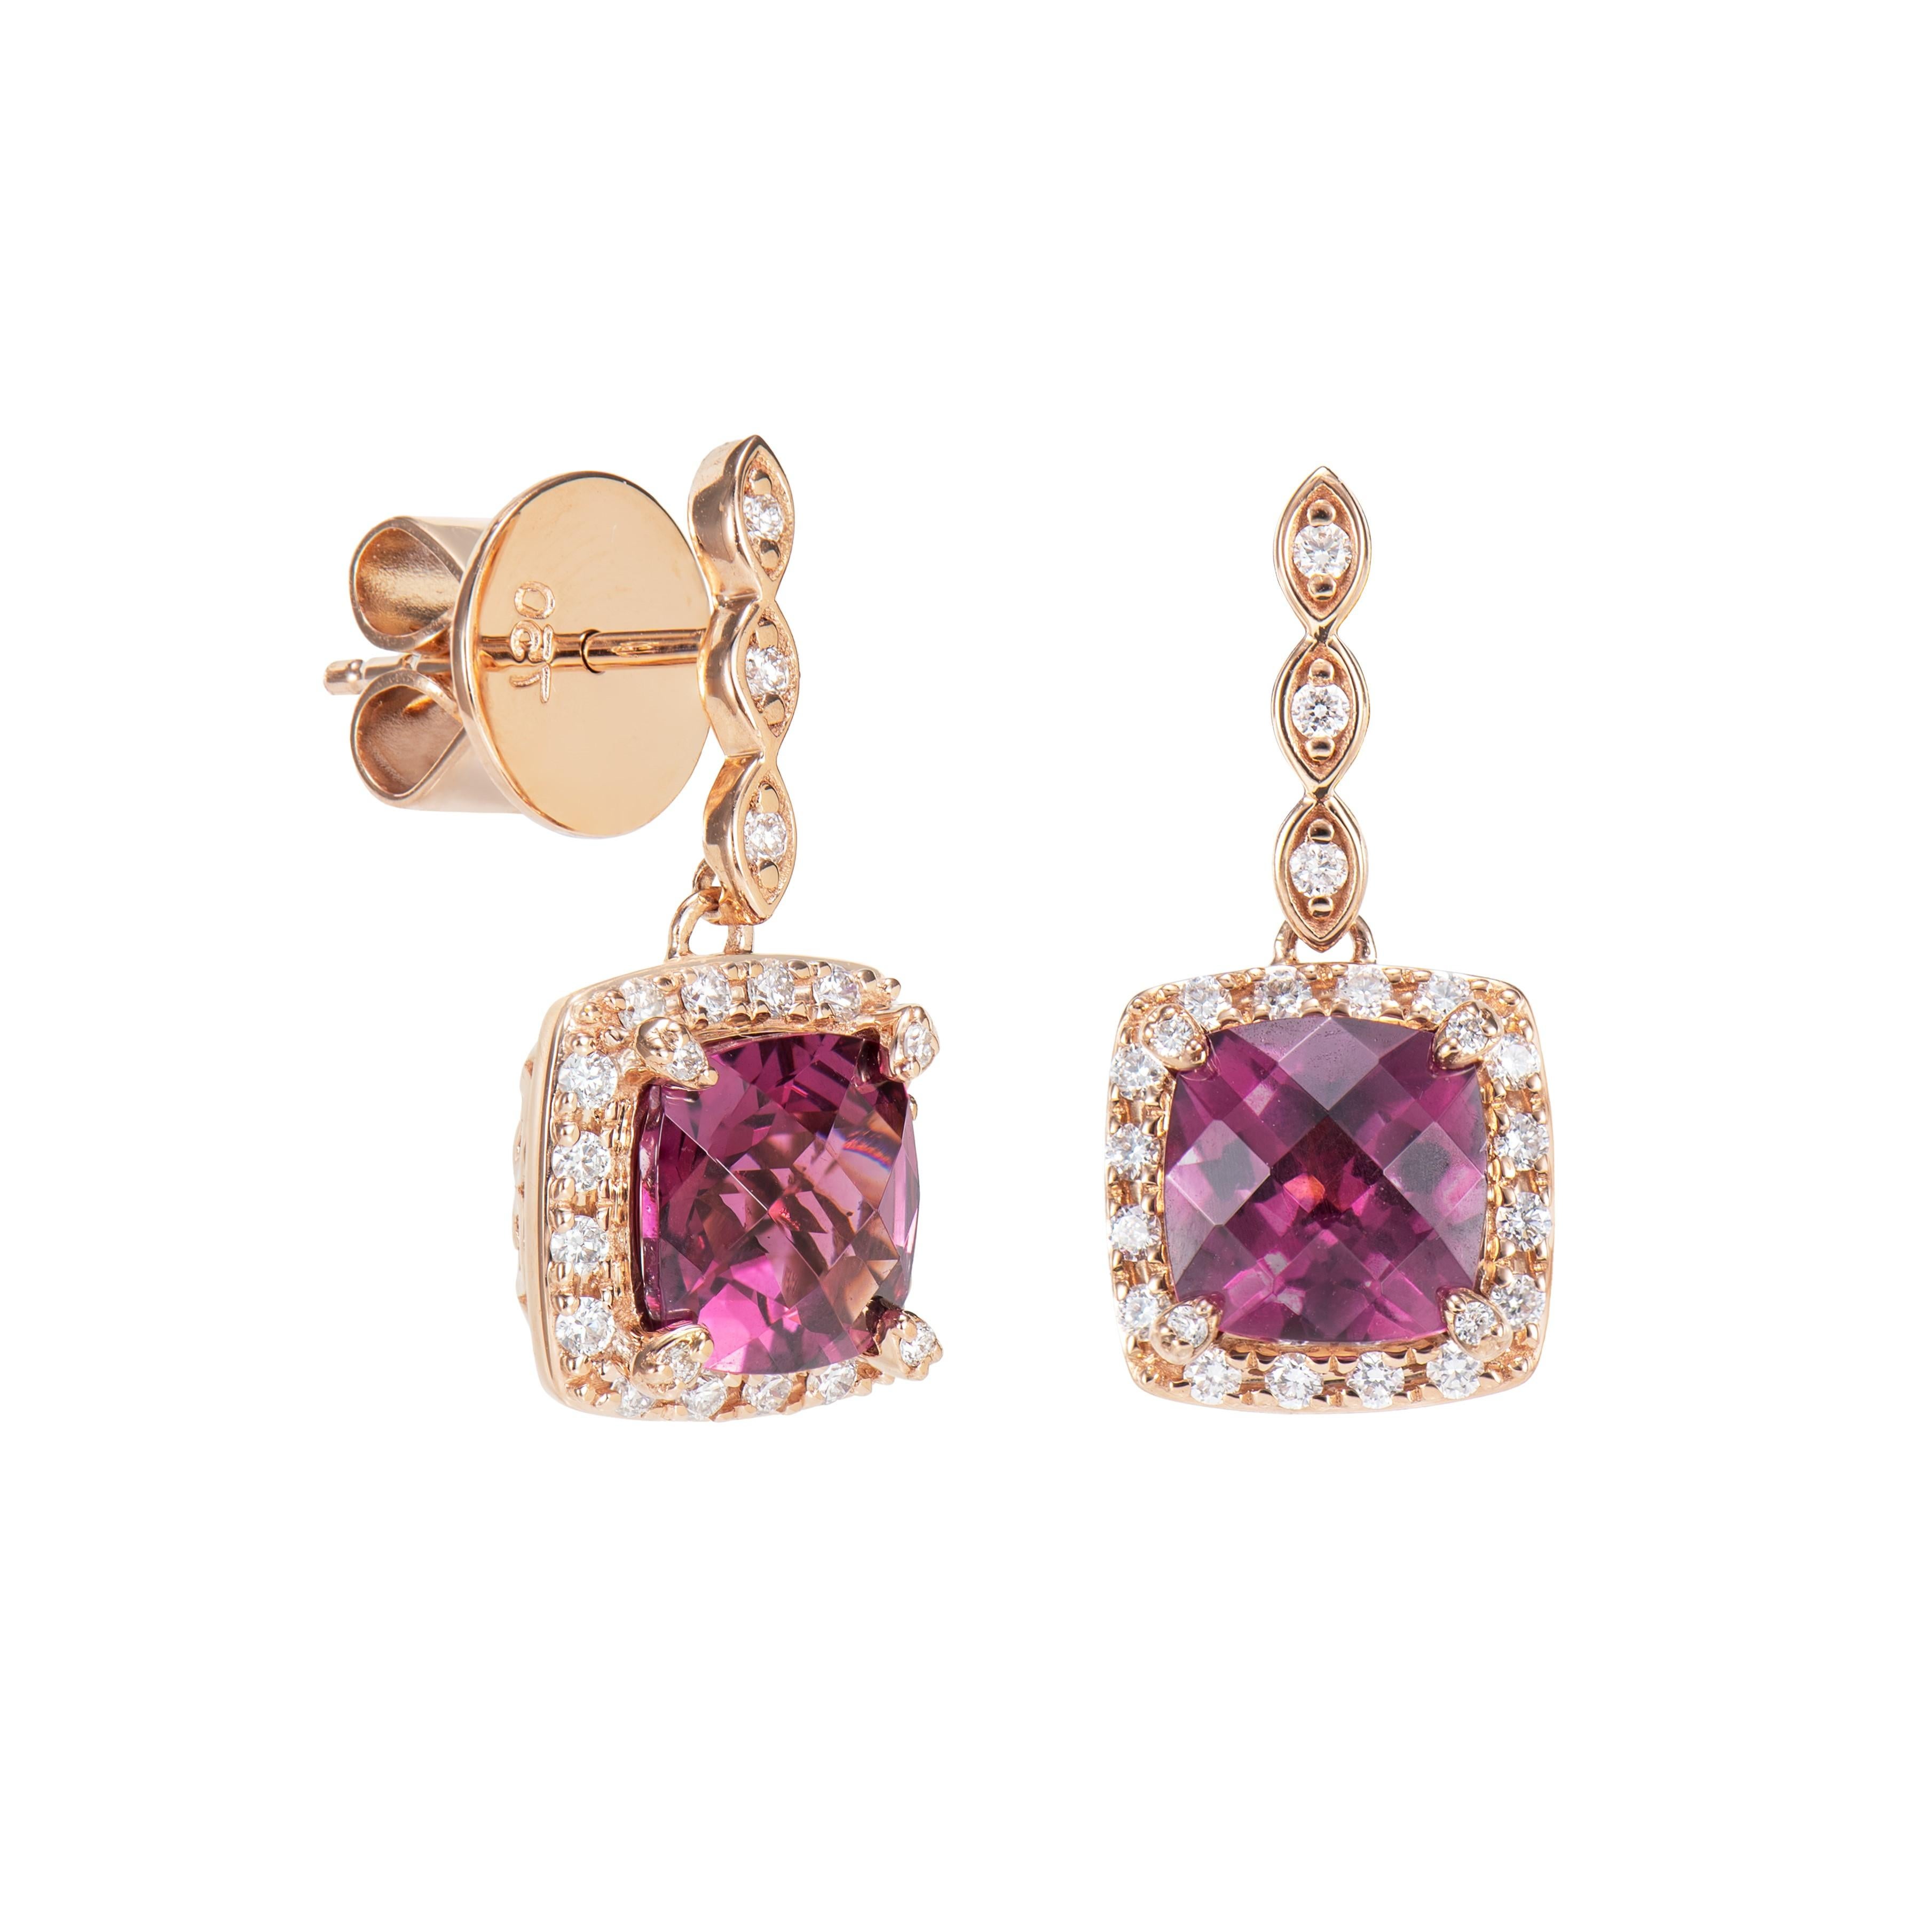 Celebrating Magenta as the color of the year for 2023, we present our exclusive Radiating Rhodolite collection. The magnificent magenta hues in these gems are brought to life in a classic rose gold setting with white diamonds.

Rhodolite Drop